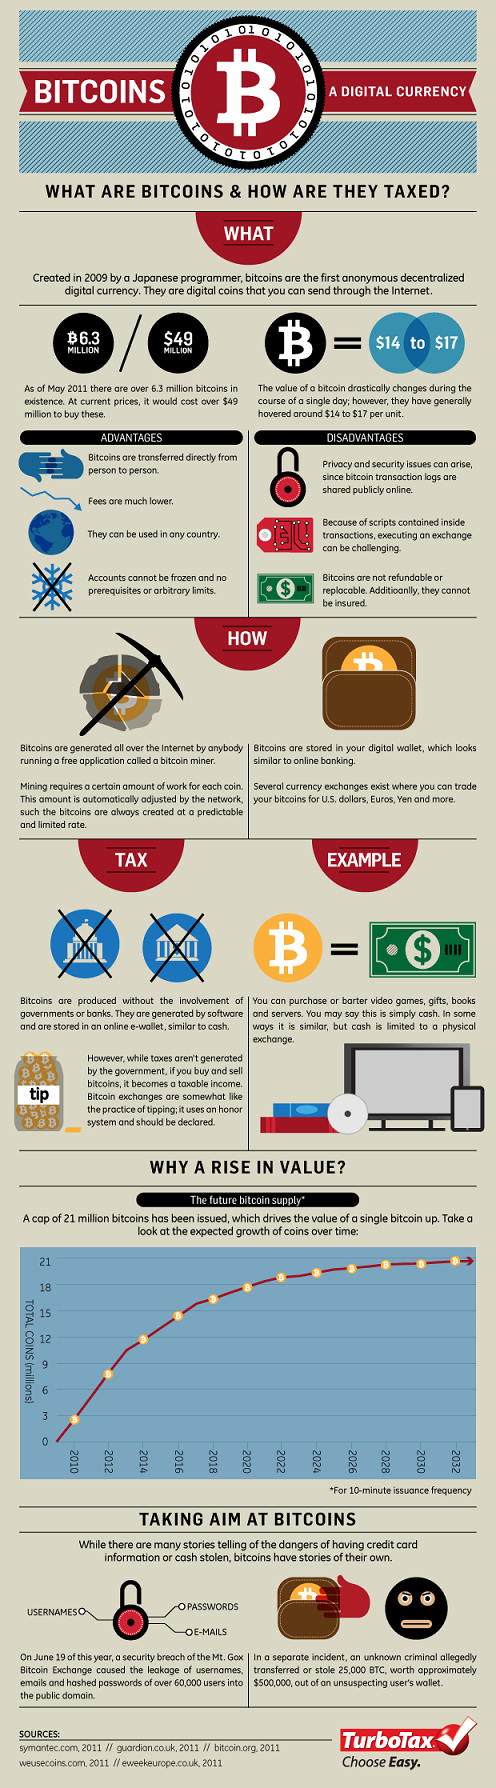 Bitcoins — The Taxless Currency